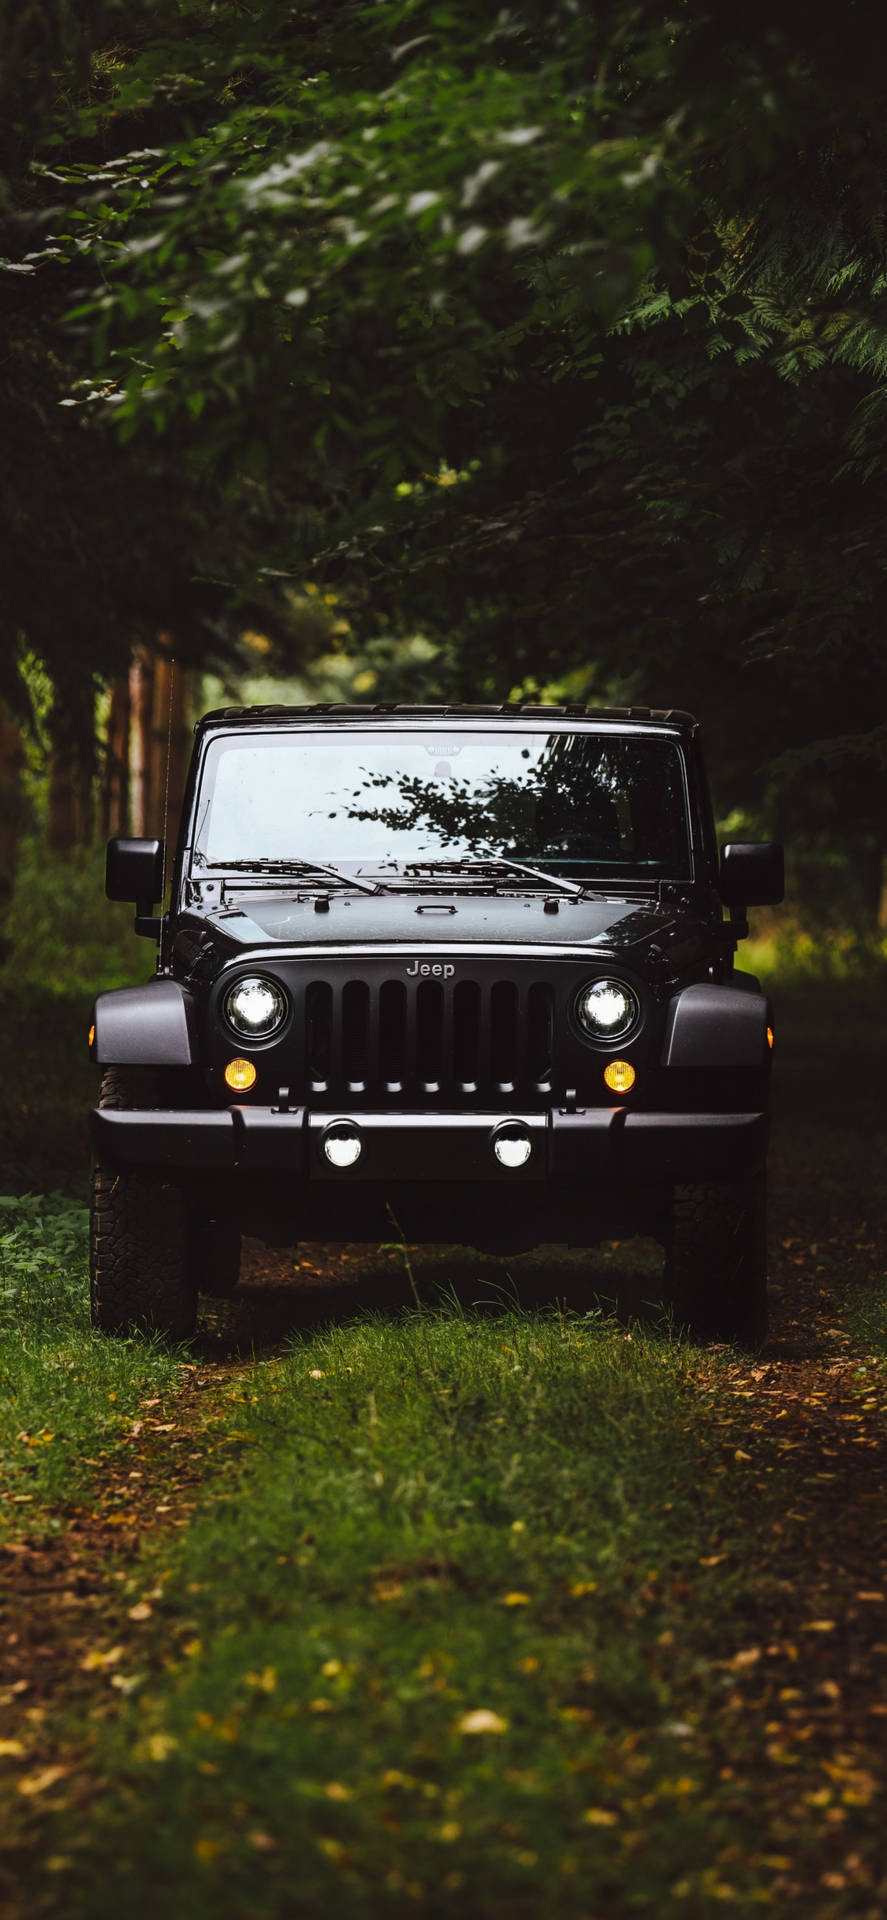 A Stunning Black Jeep Wrangler venturing through a Secluded Forest. Wallpaper